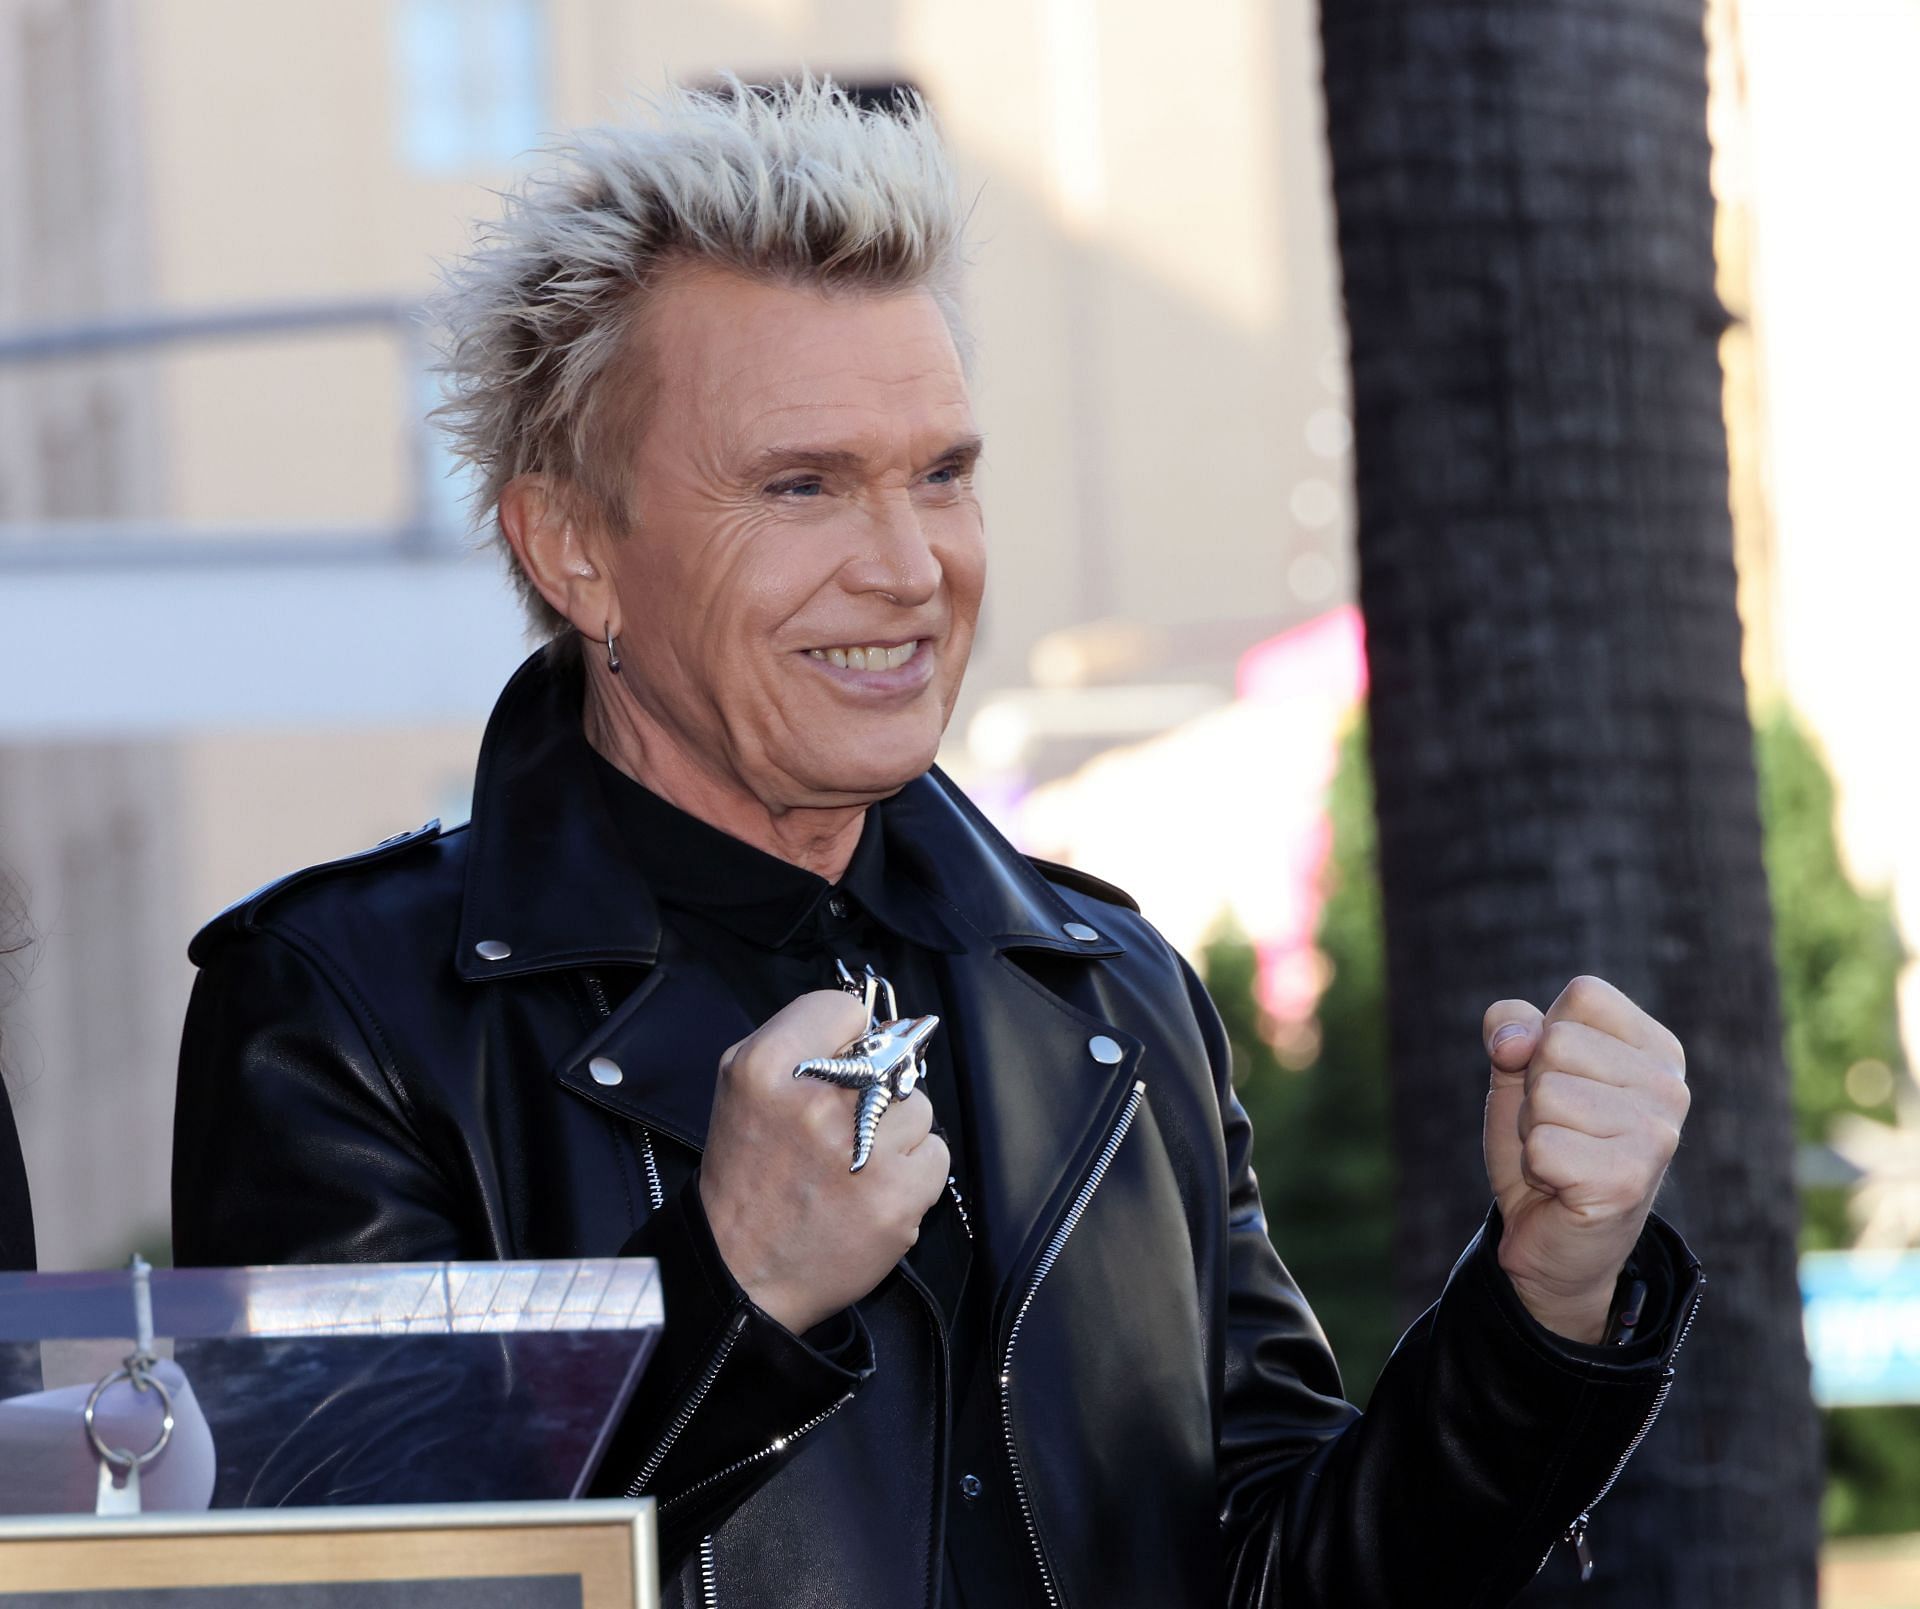 Billy Idol Honored With Star On The Hollywood Walk Of Fame